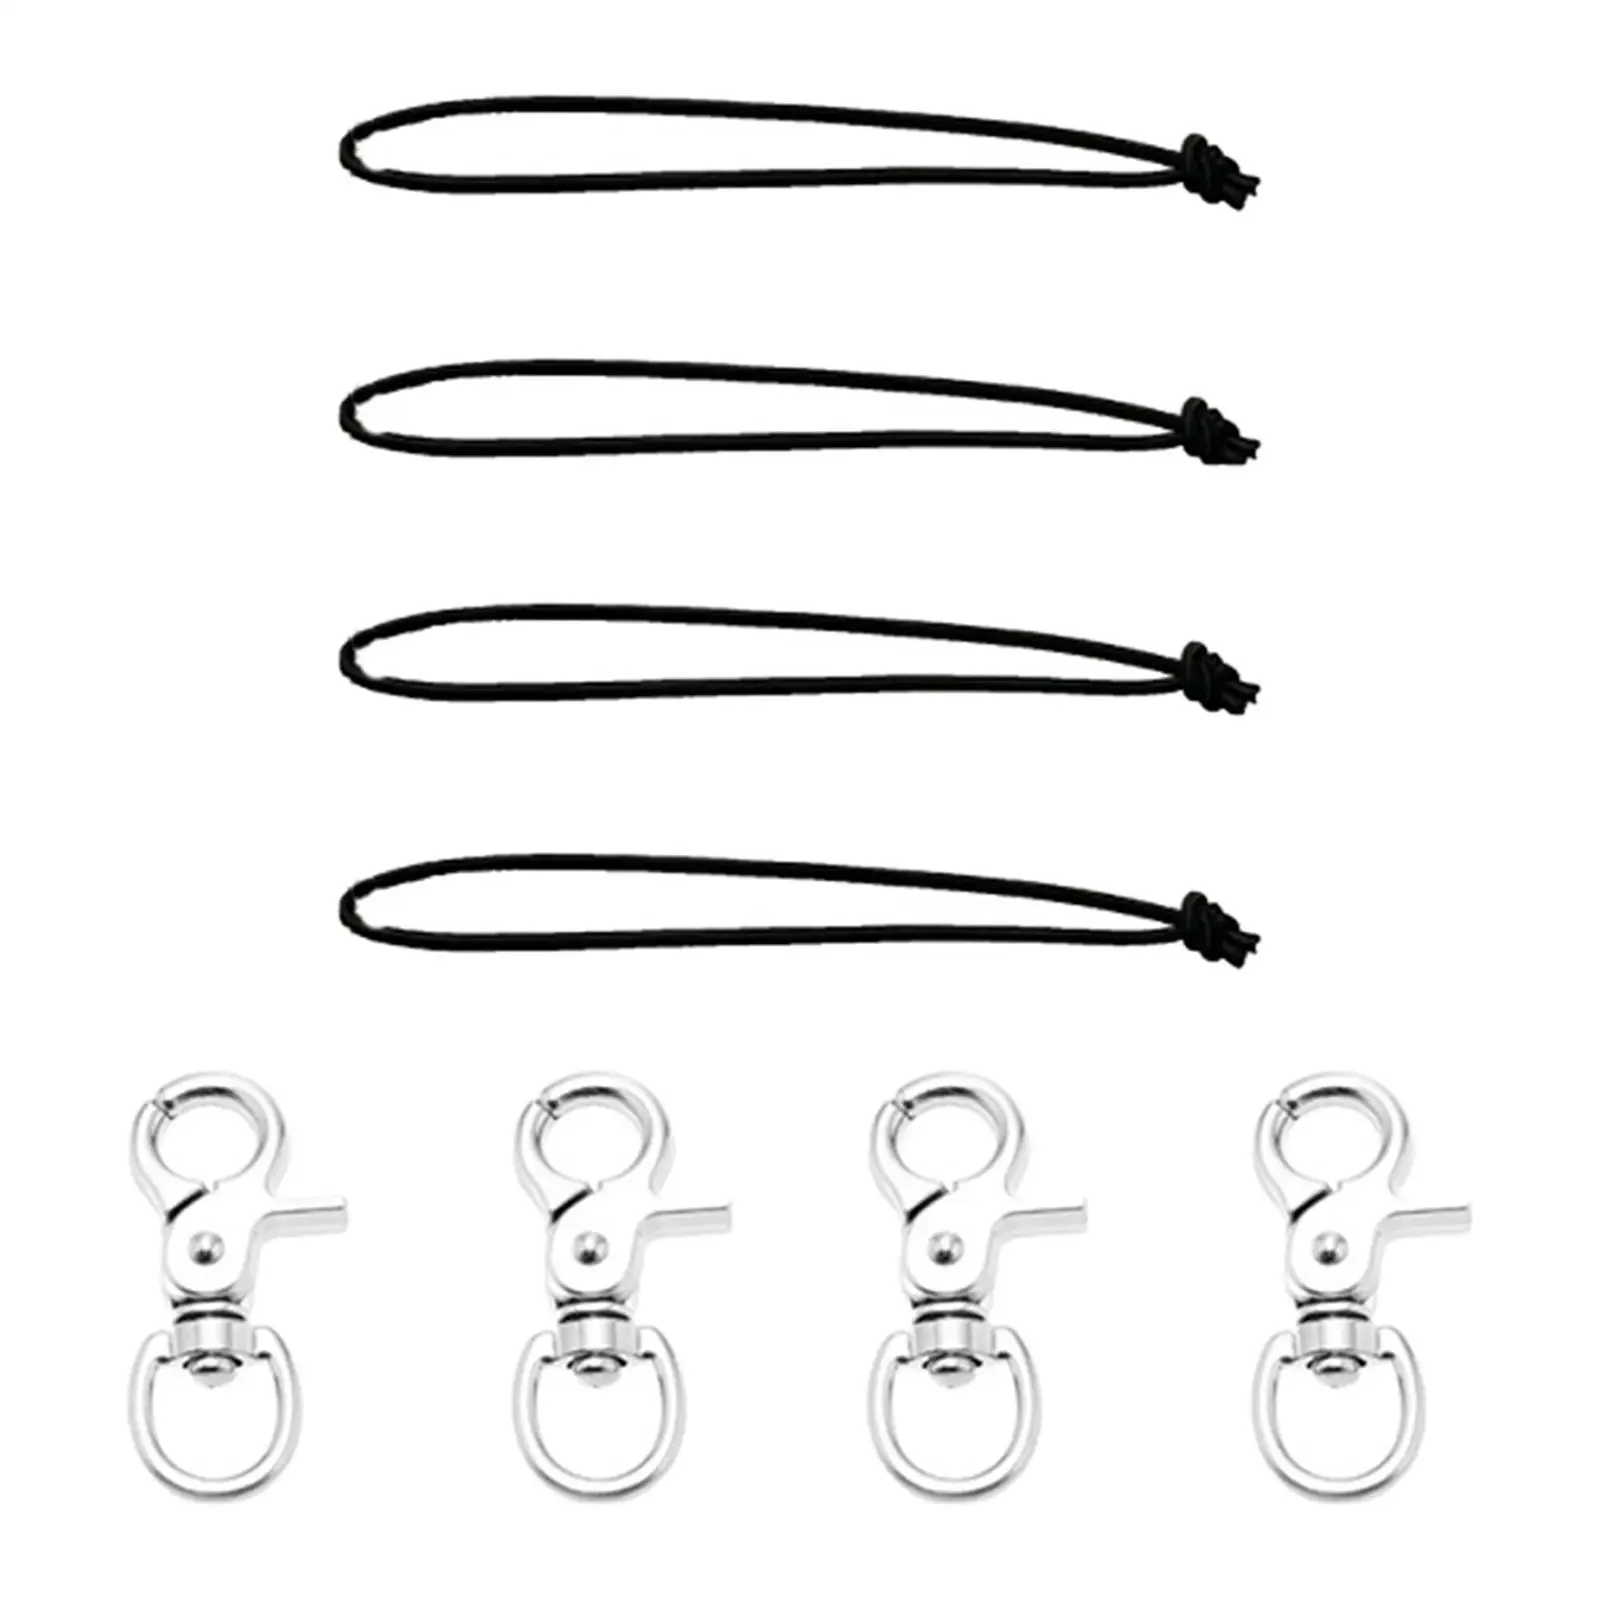 4x Practical Snowboard Leash Cord Replacement Accessories Outdoor Hiking Ski